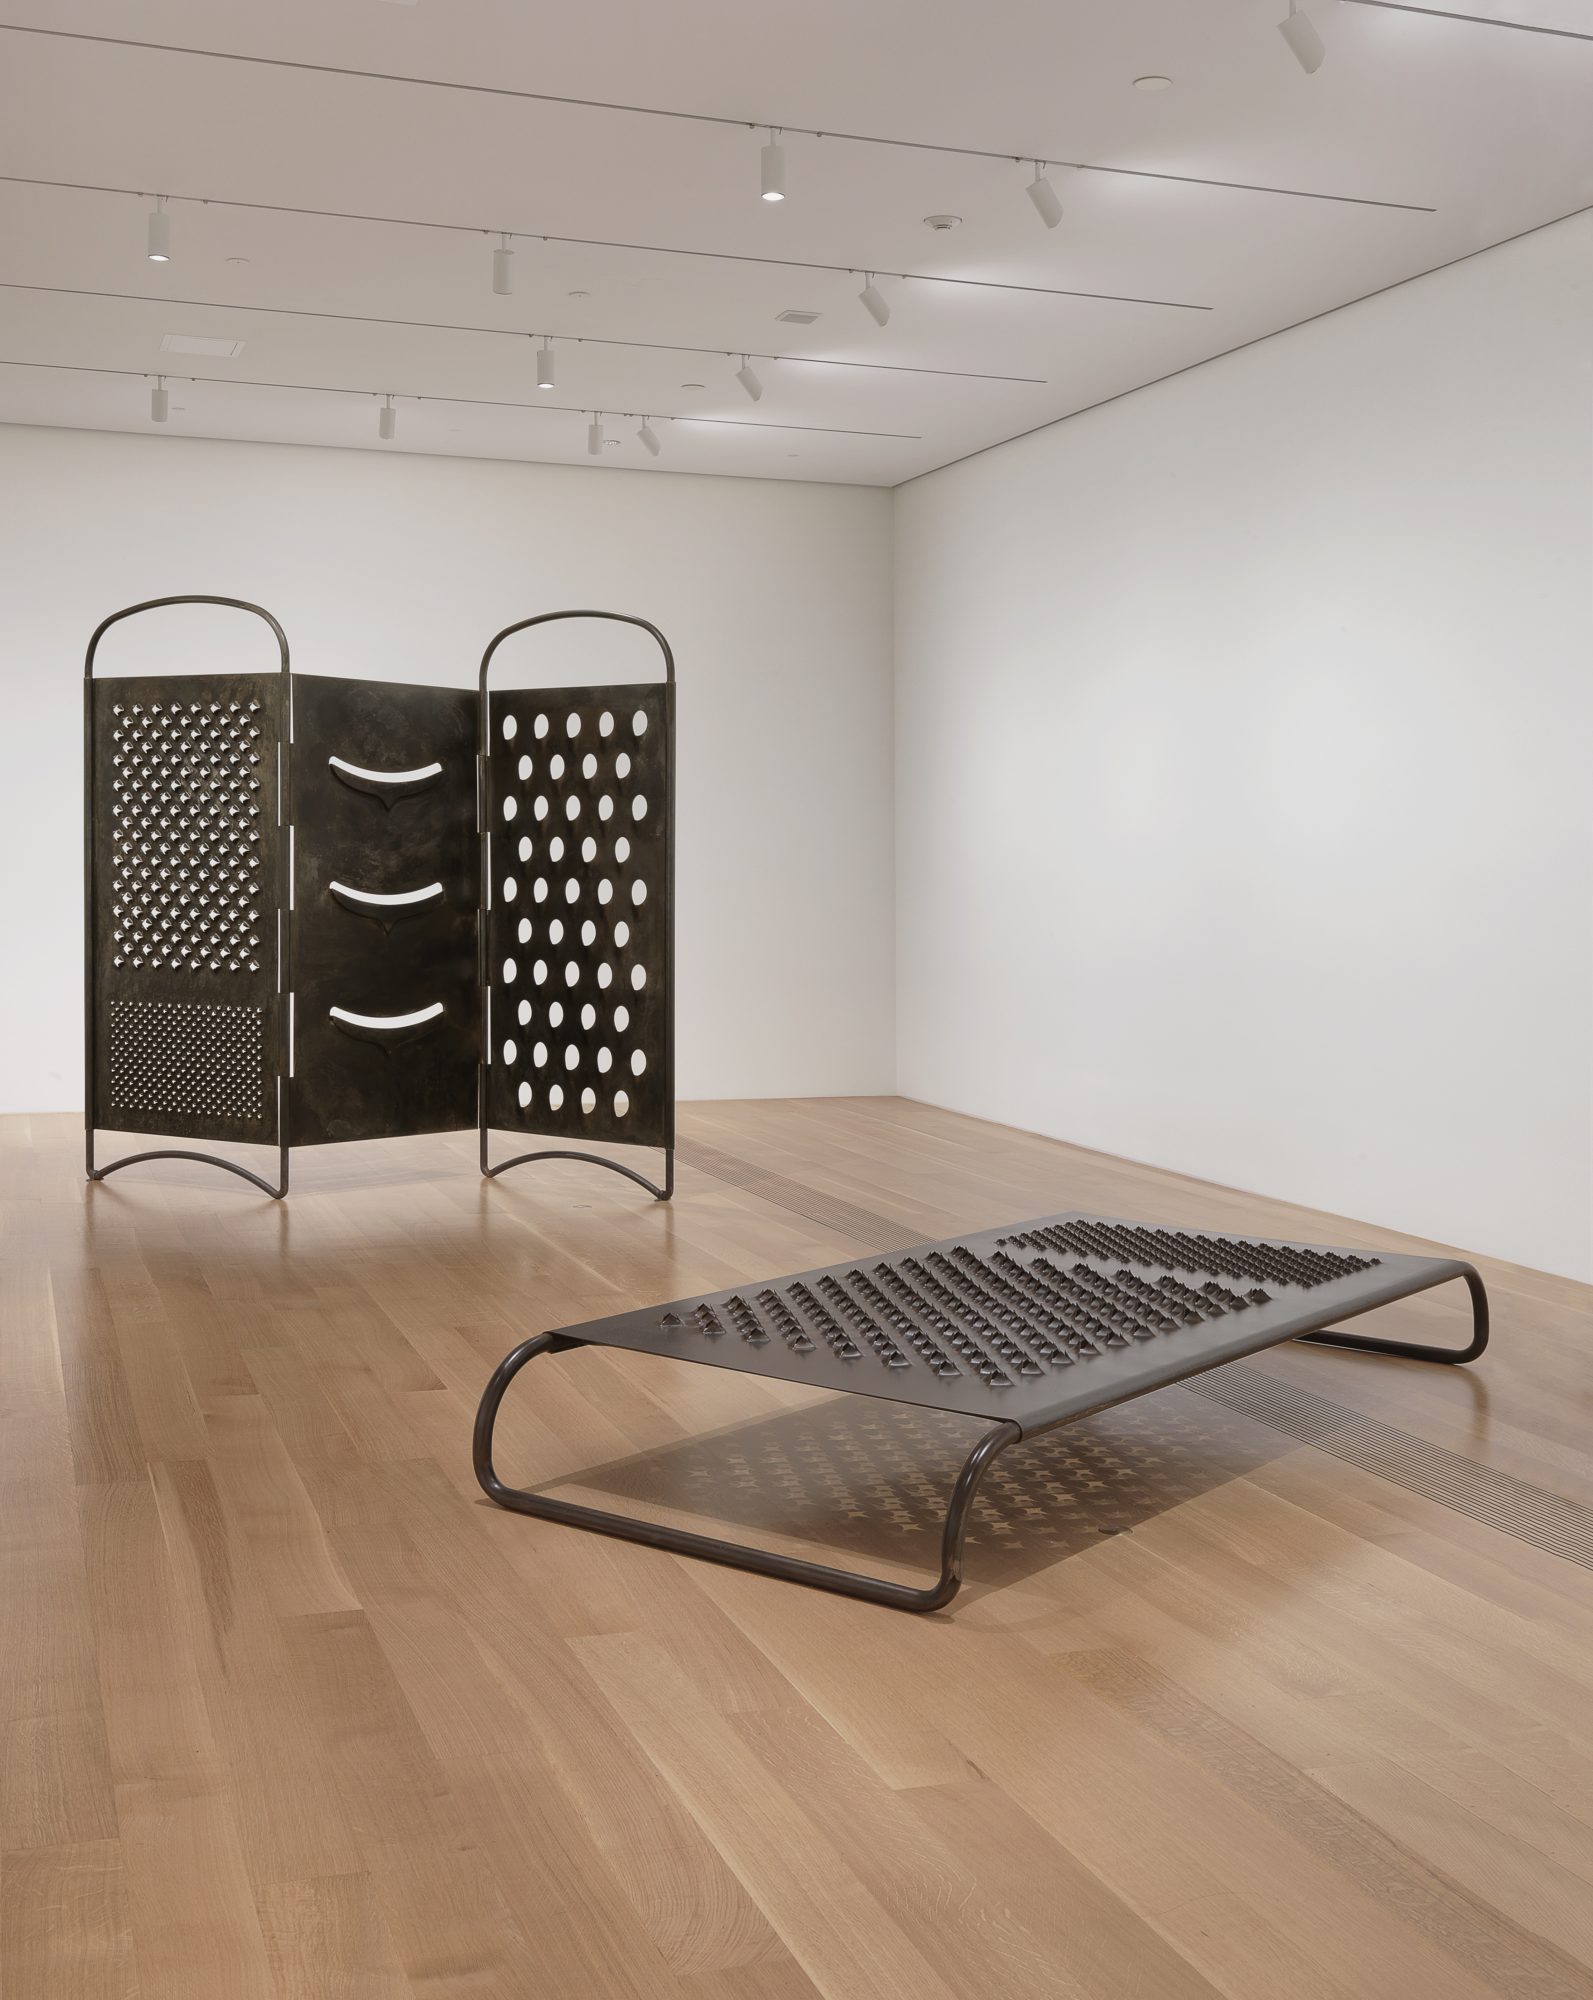 Gallery view of two large cheese grater-like objects, one laying on handles and one standing upright